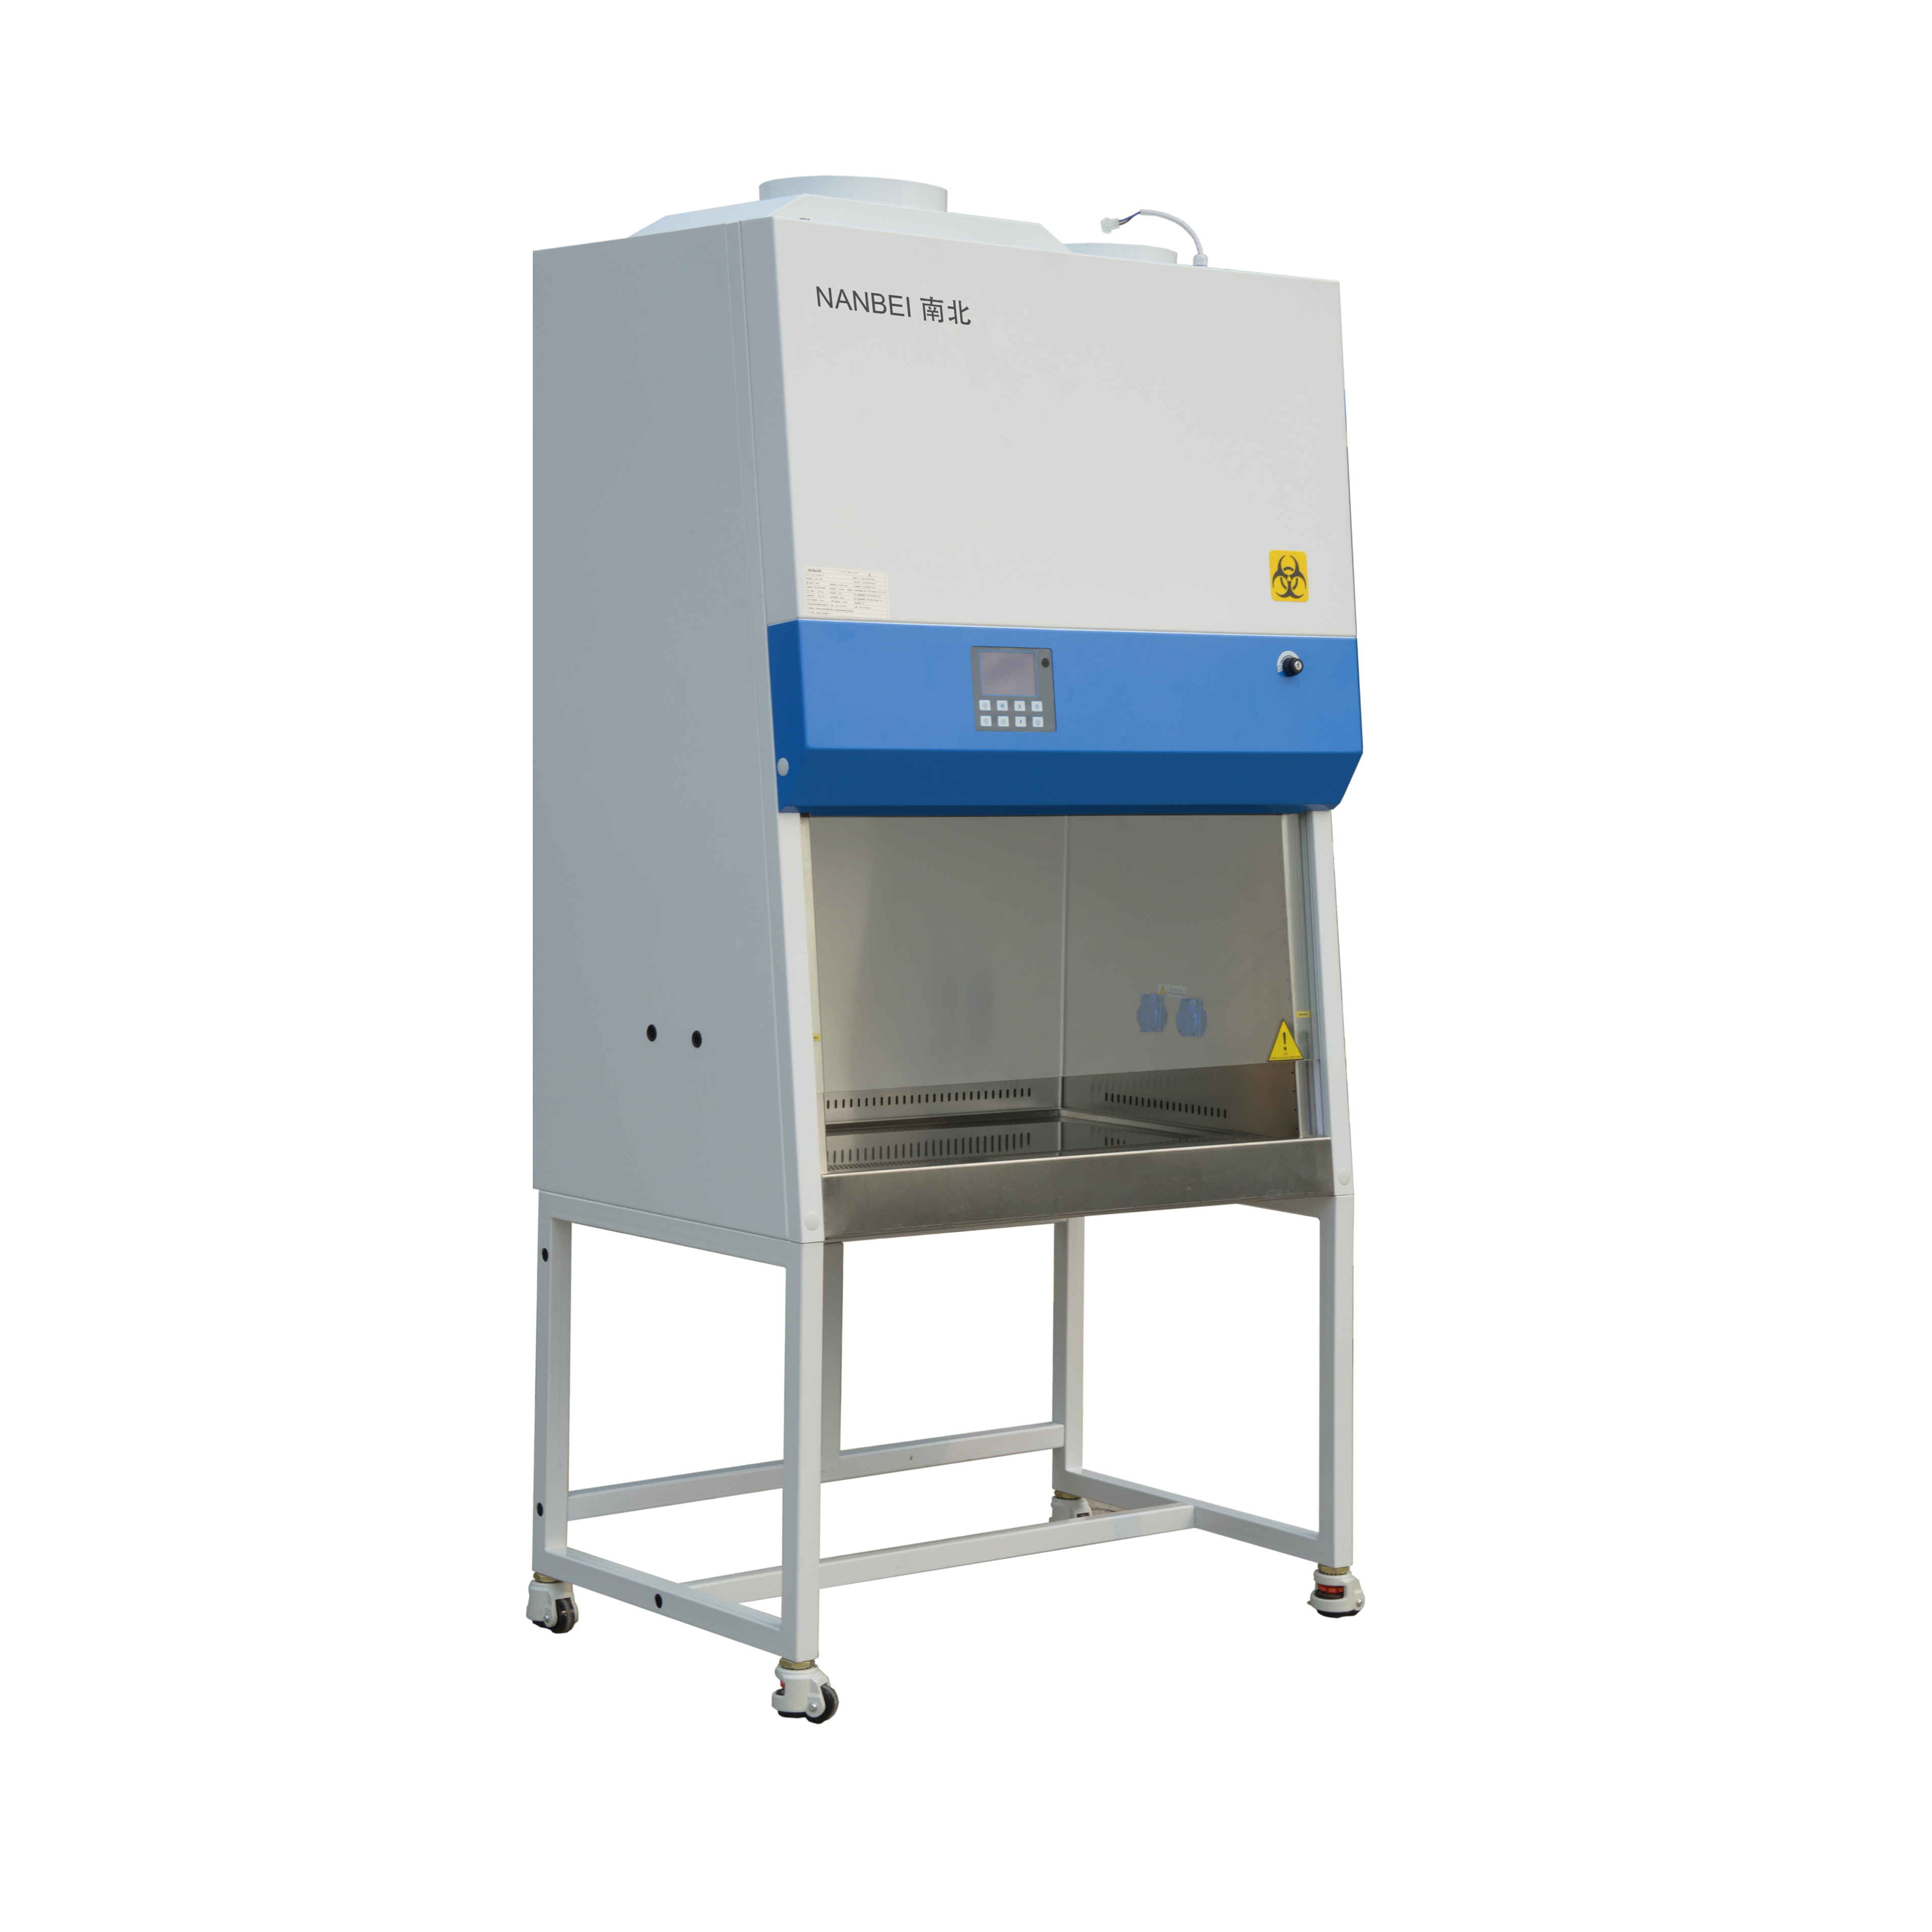 BSC-1100II A2-X 30% Air exhaust single person biological safety cabinet